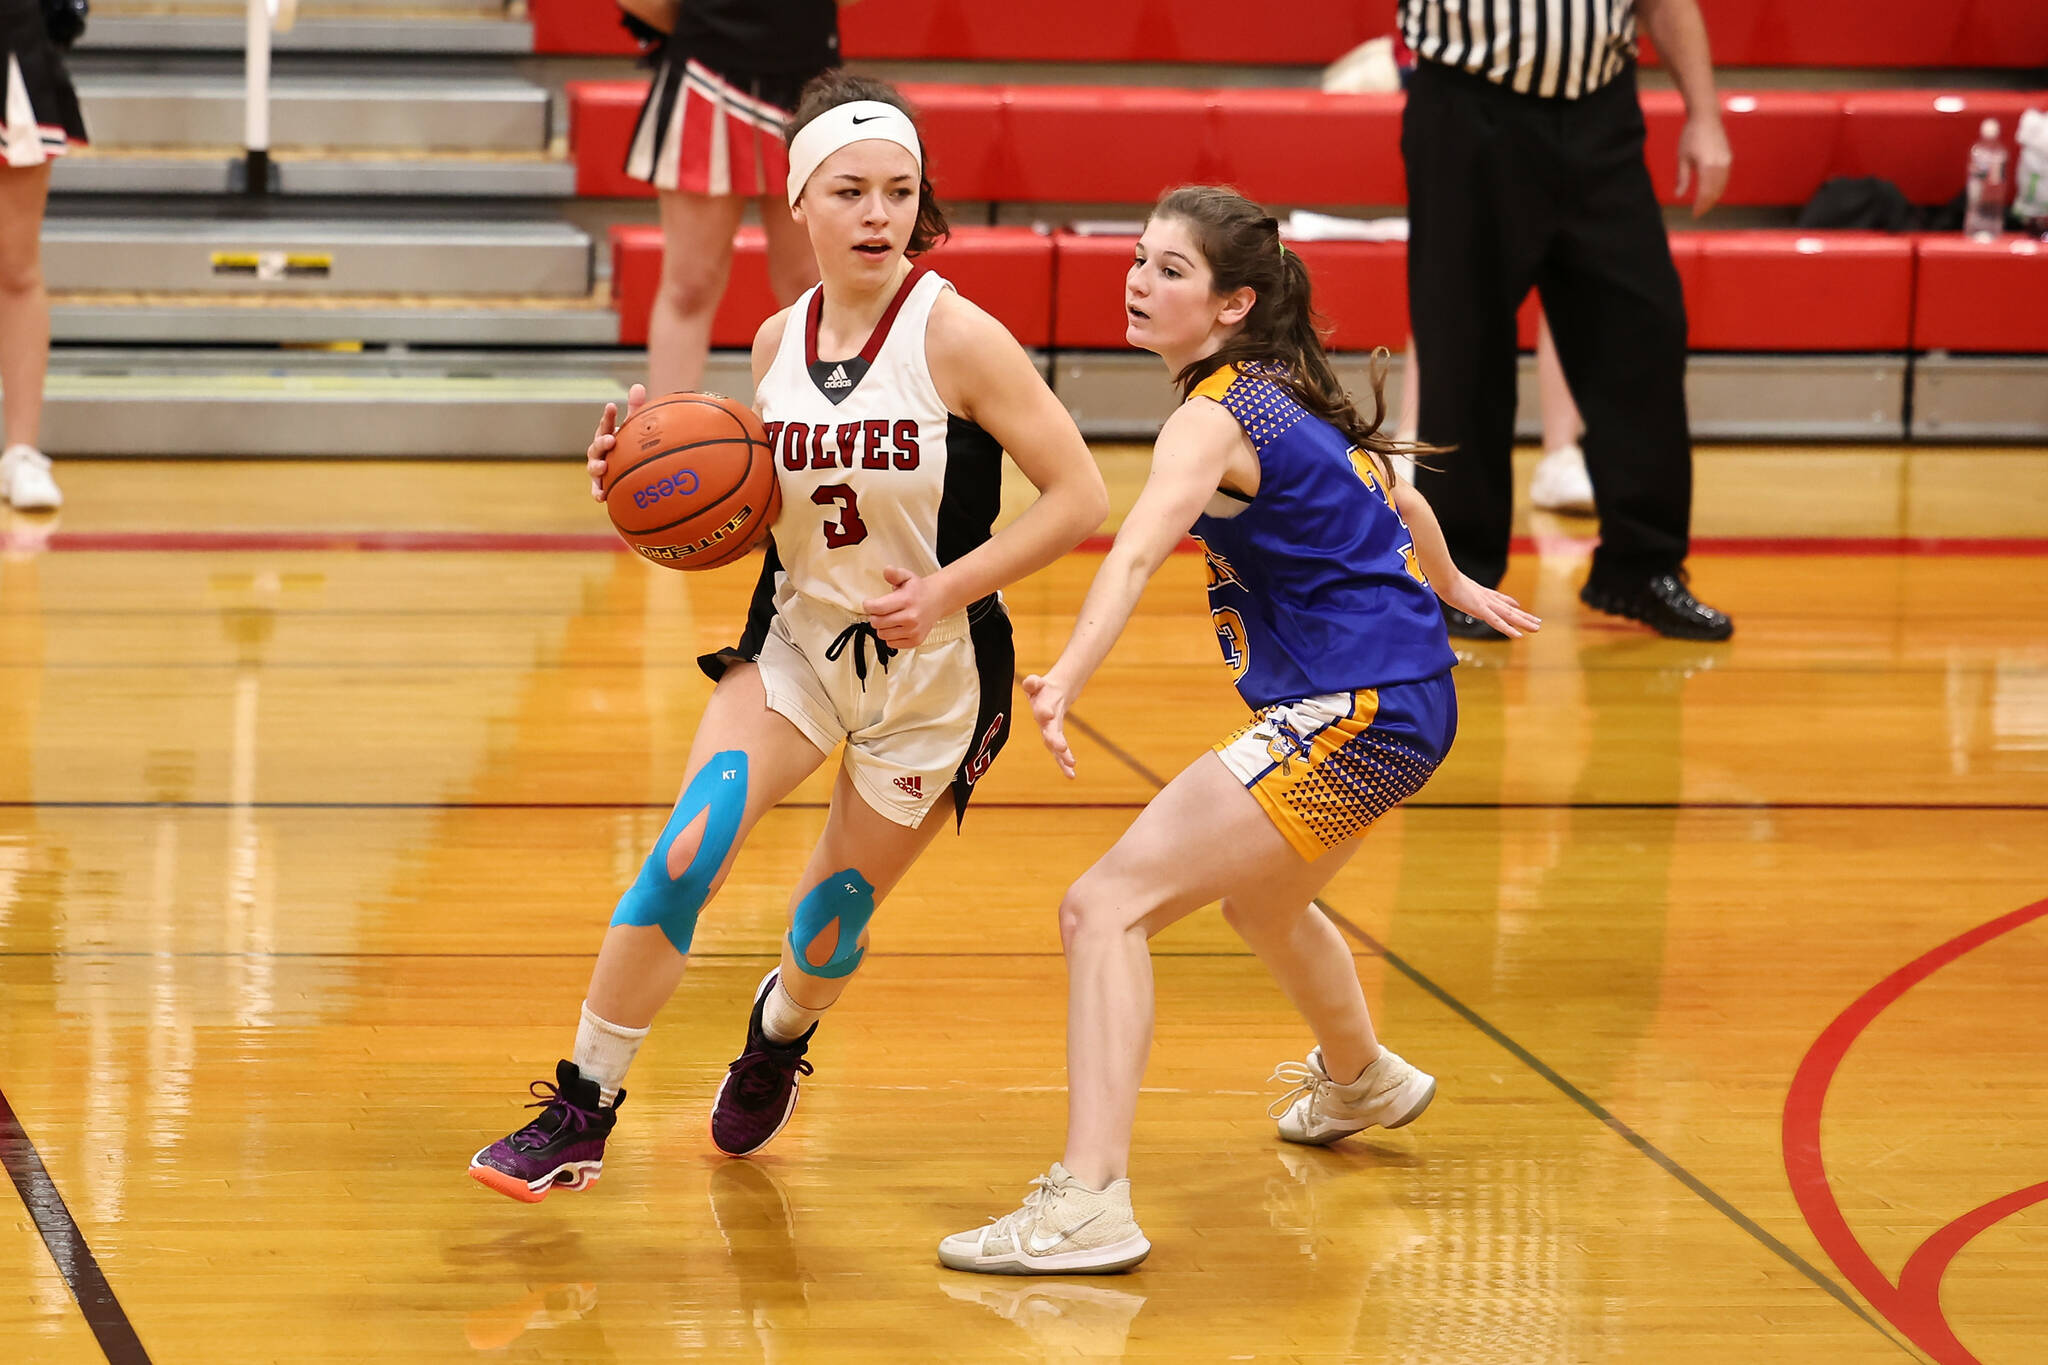 Photo by John Fisken
Coupeville High School Senior Gwen Gustafson tries to break past a Crescent defender during a basketball game Wednesday night. The girls team beat visiting Crescent 46-22.